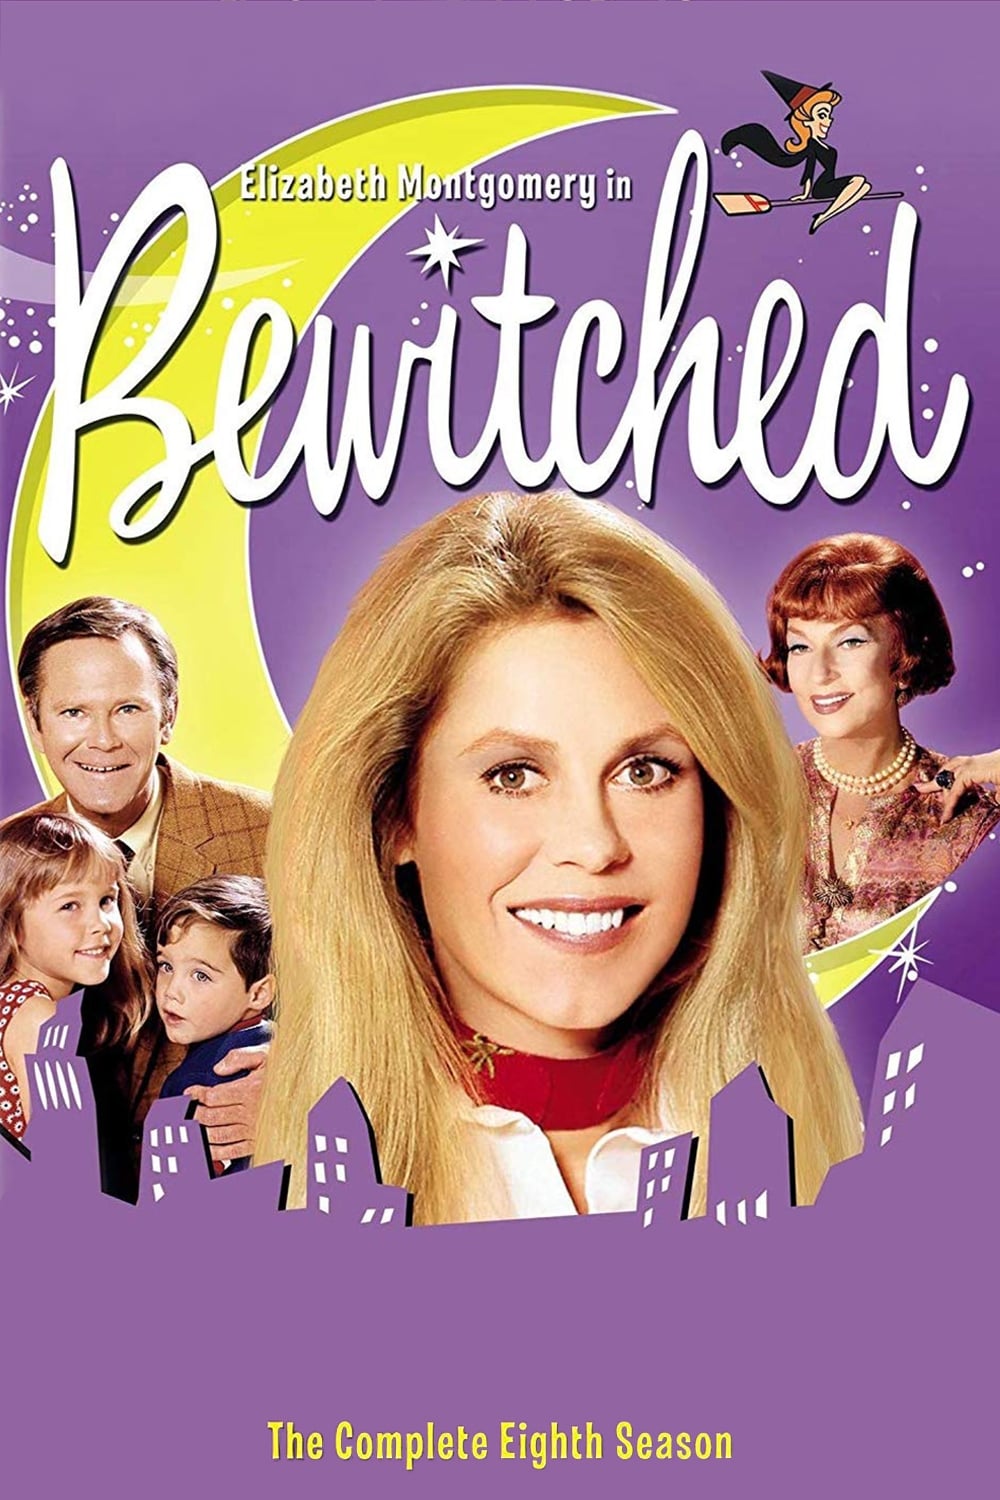 Bewitched Season 8